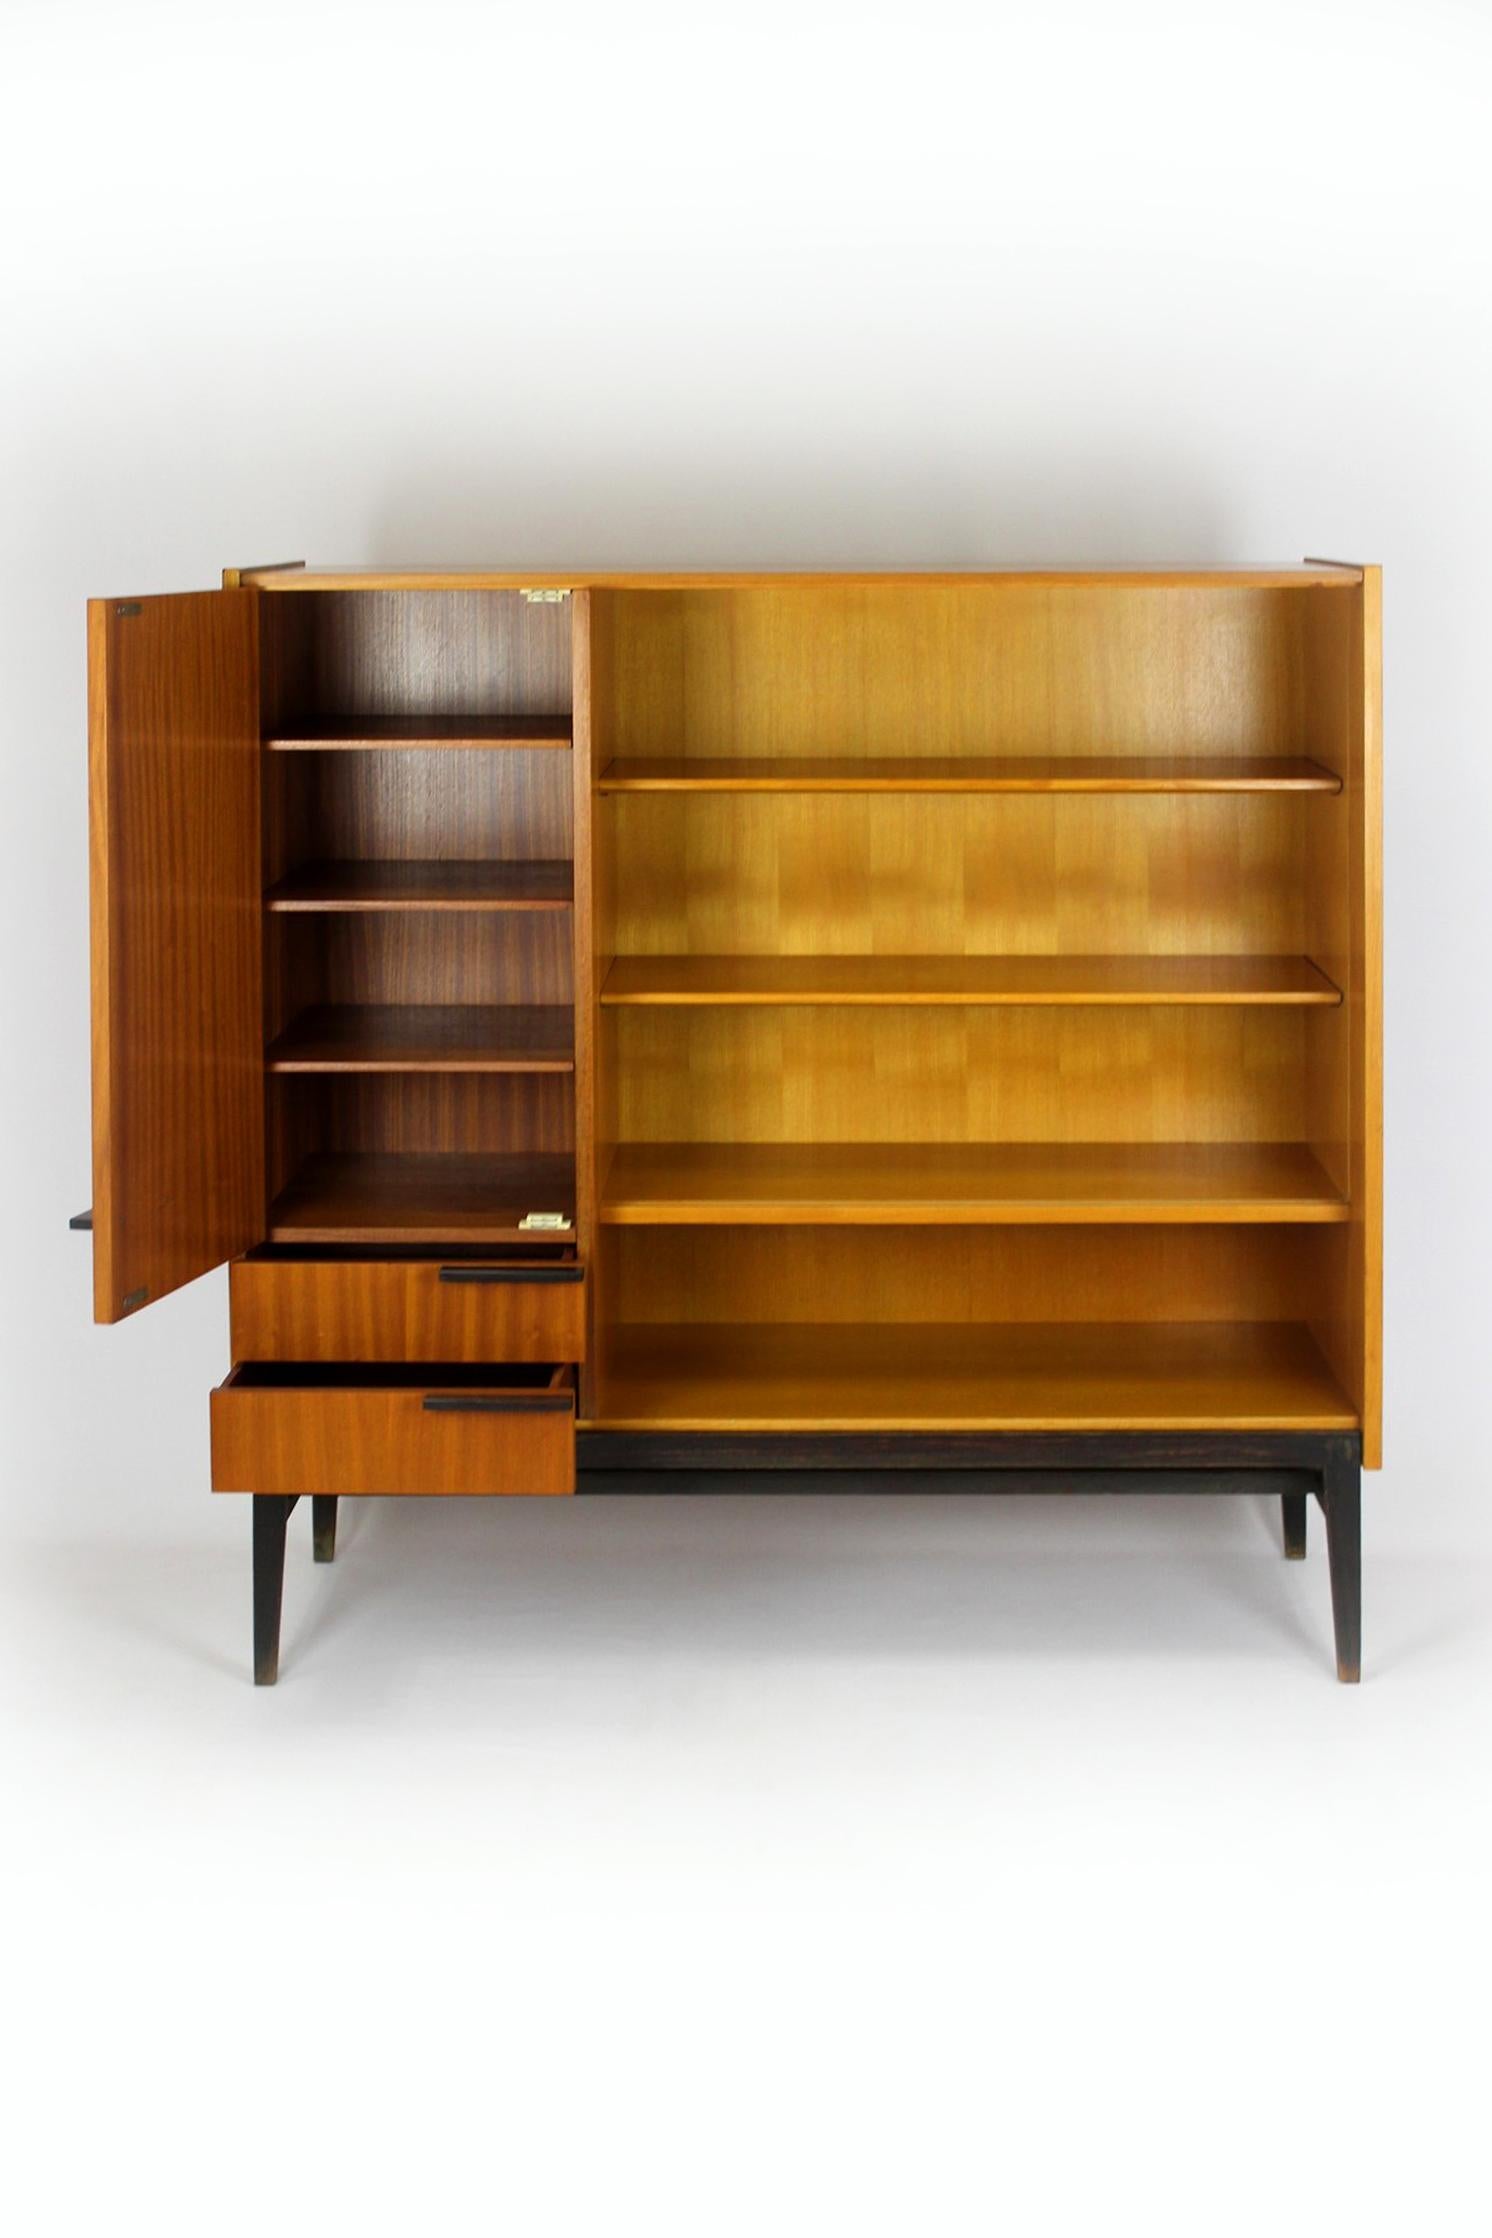 Mid-Century Modern Midcentury Bookcase from Up Zavody, 1970 For Sale